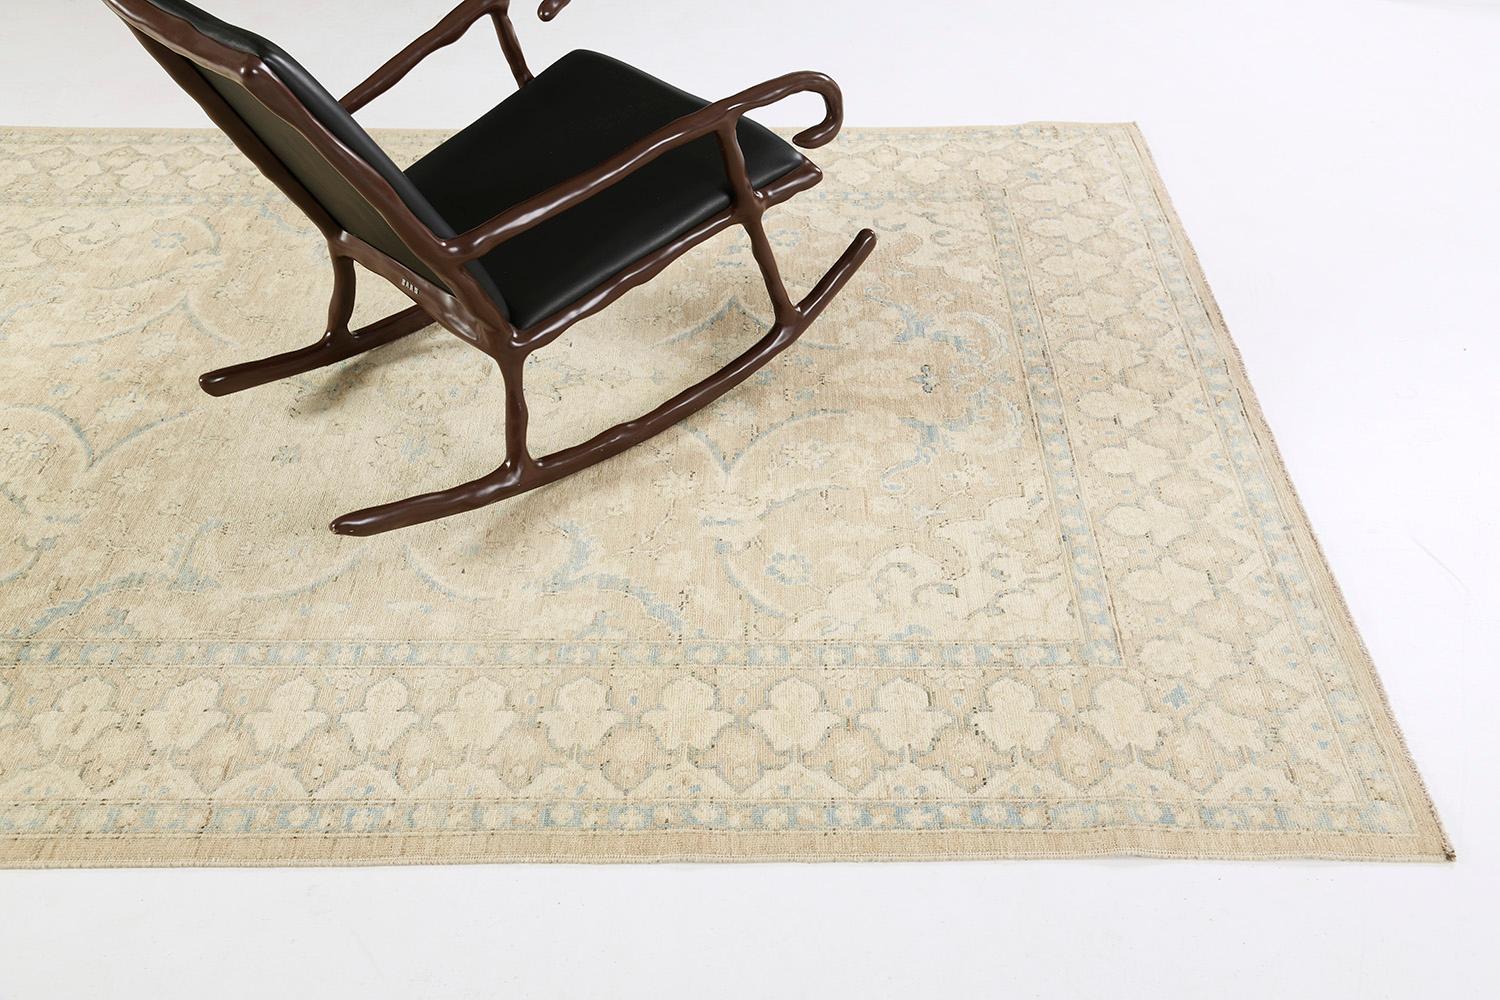 This elegant rug in Rapture collection features a majestic central rosette medallion surrounded by graceful floral forms, leafy tendrils, stylized florals and lush palmettes. Through the use of muted neutral color scheme of beige, ivory and cerulean